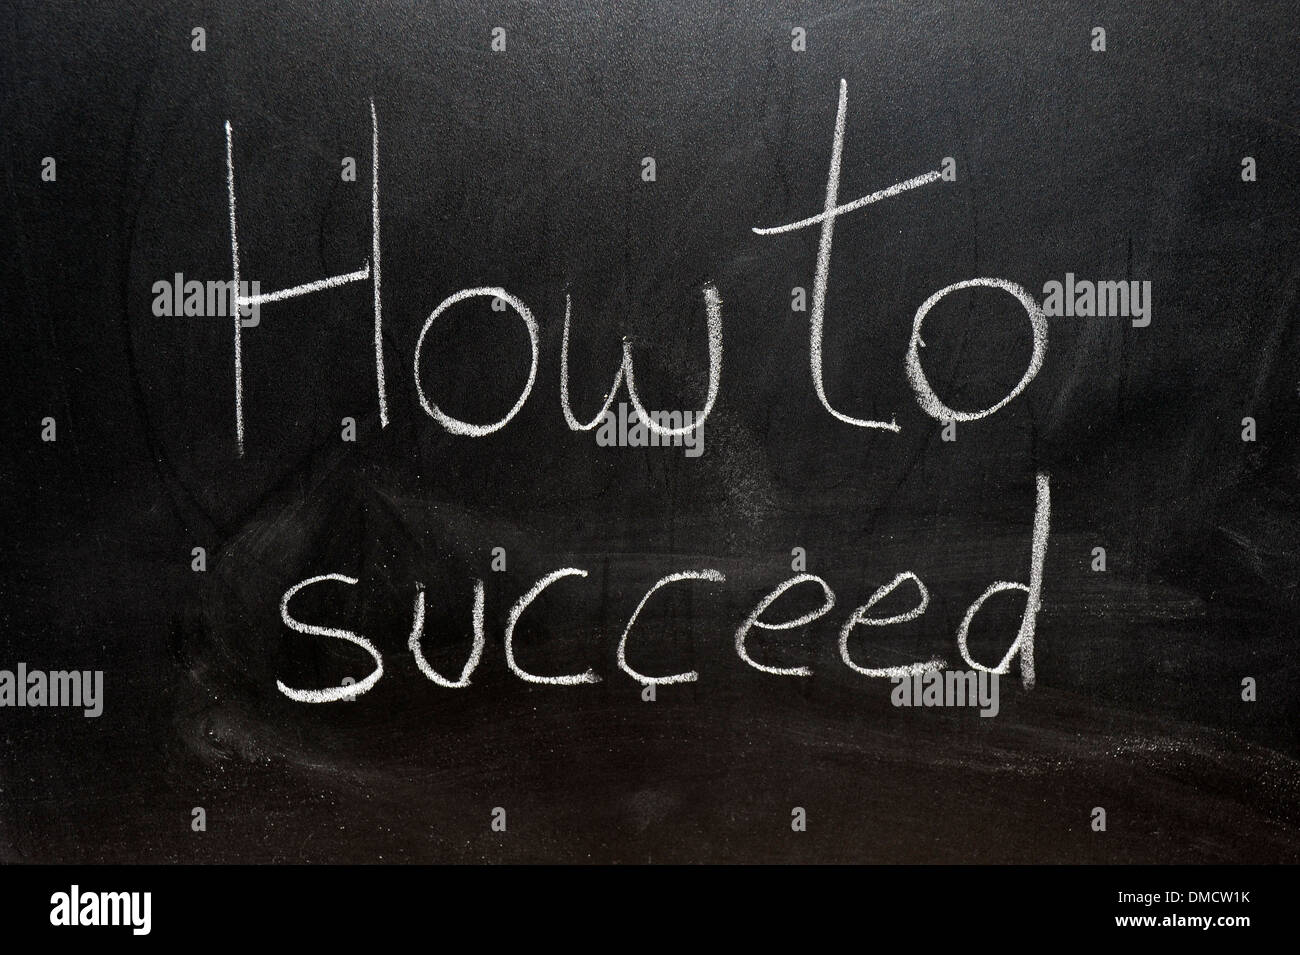 How to succeed drawn on a blackboard in white chalk. Stock Photo